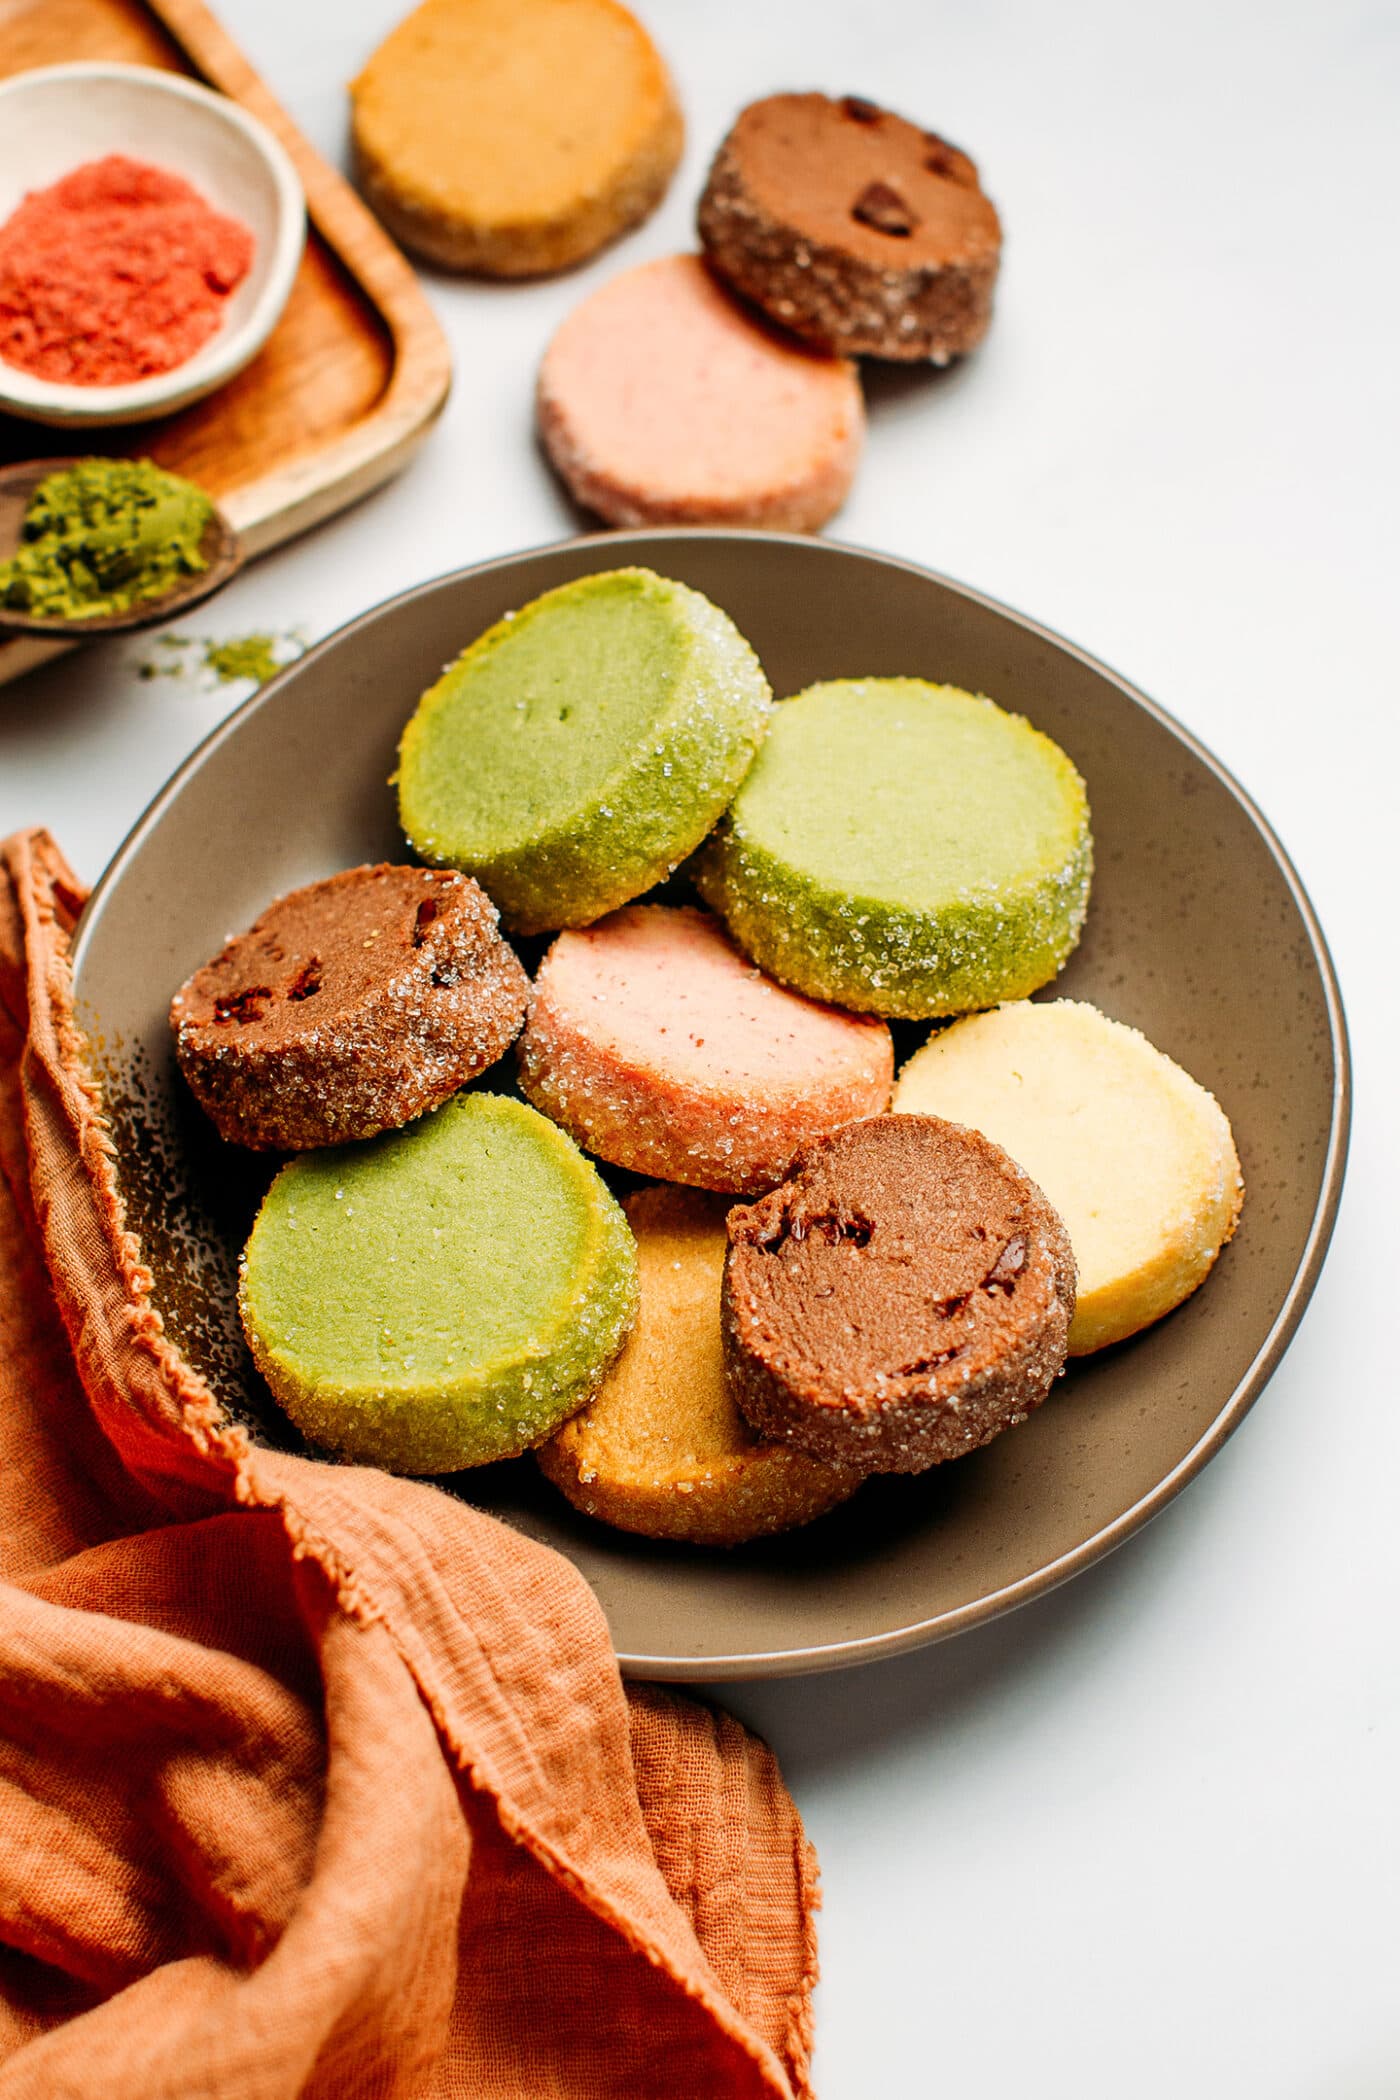 Shortbread cookies of different colors on a plate.